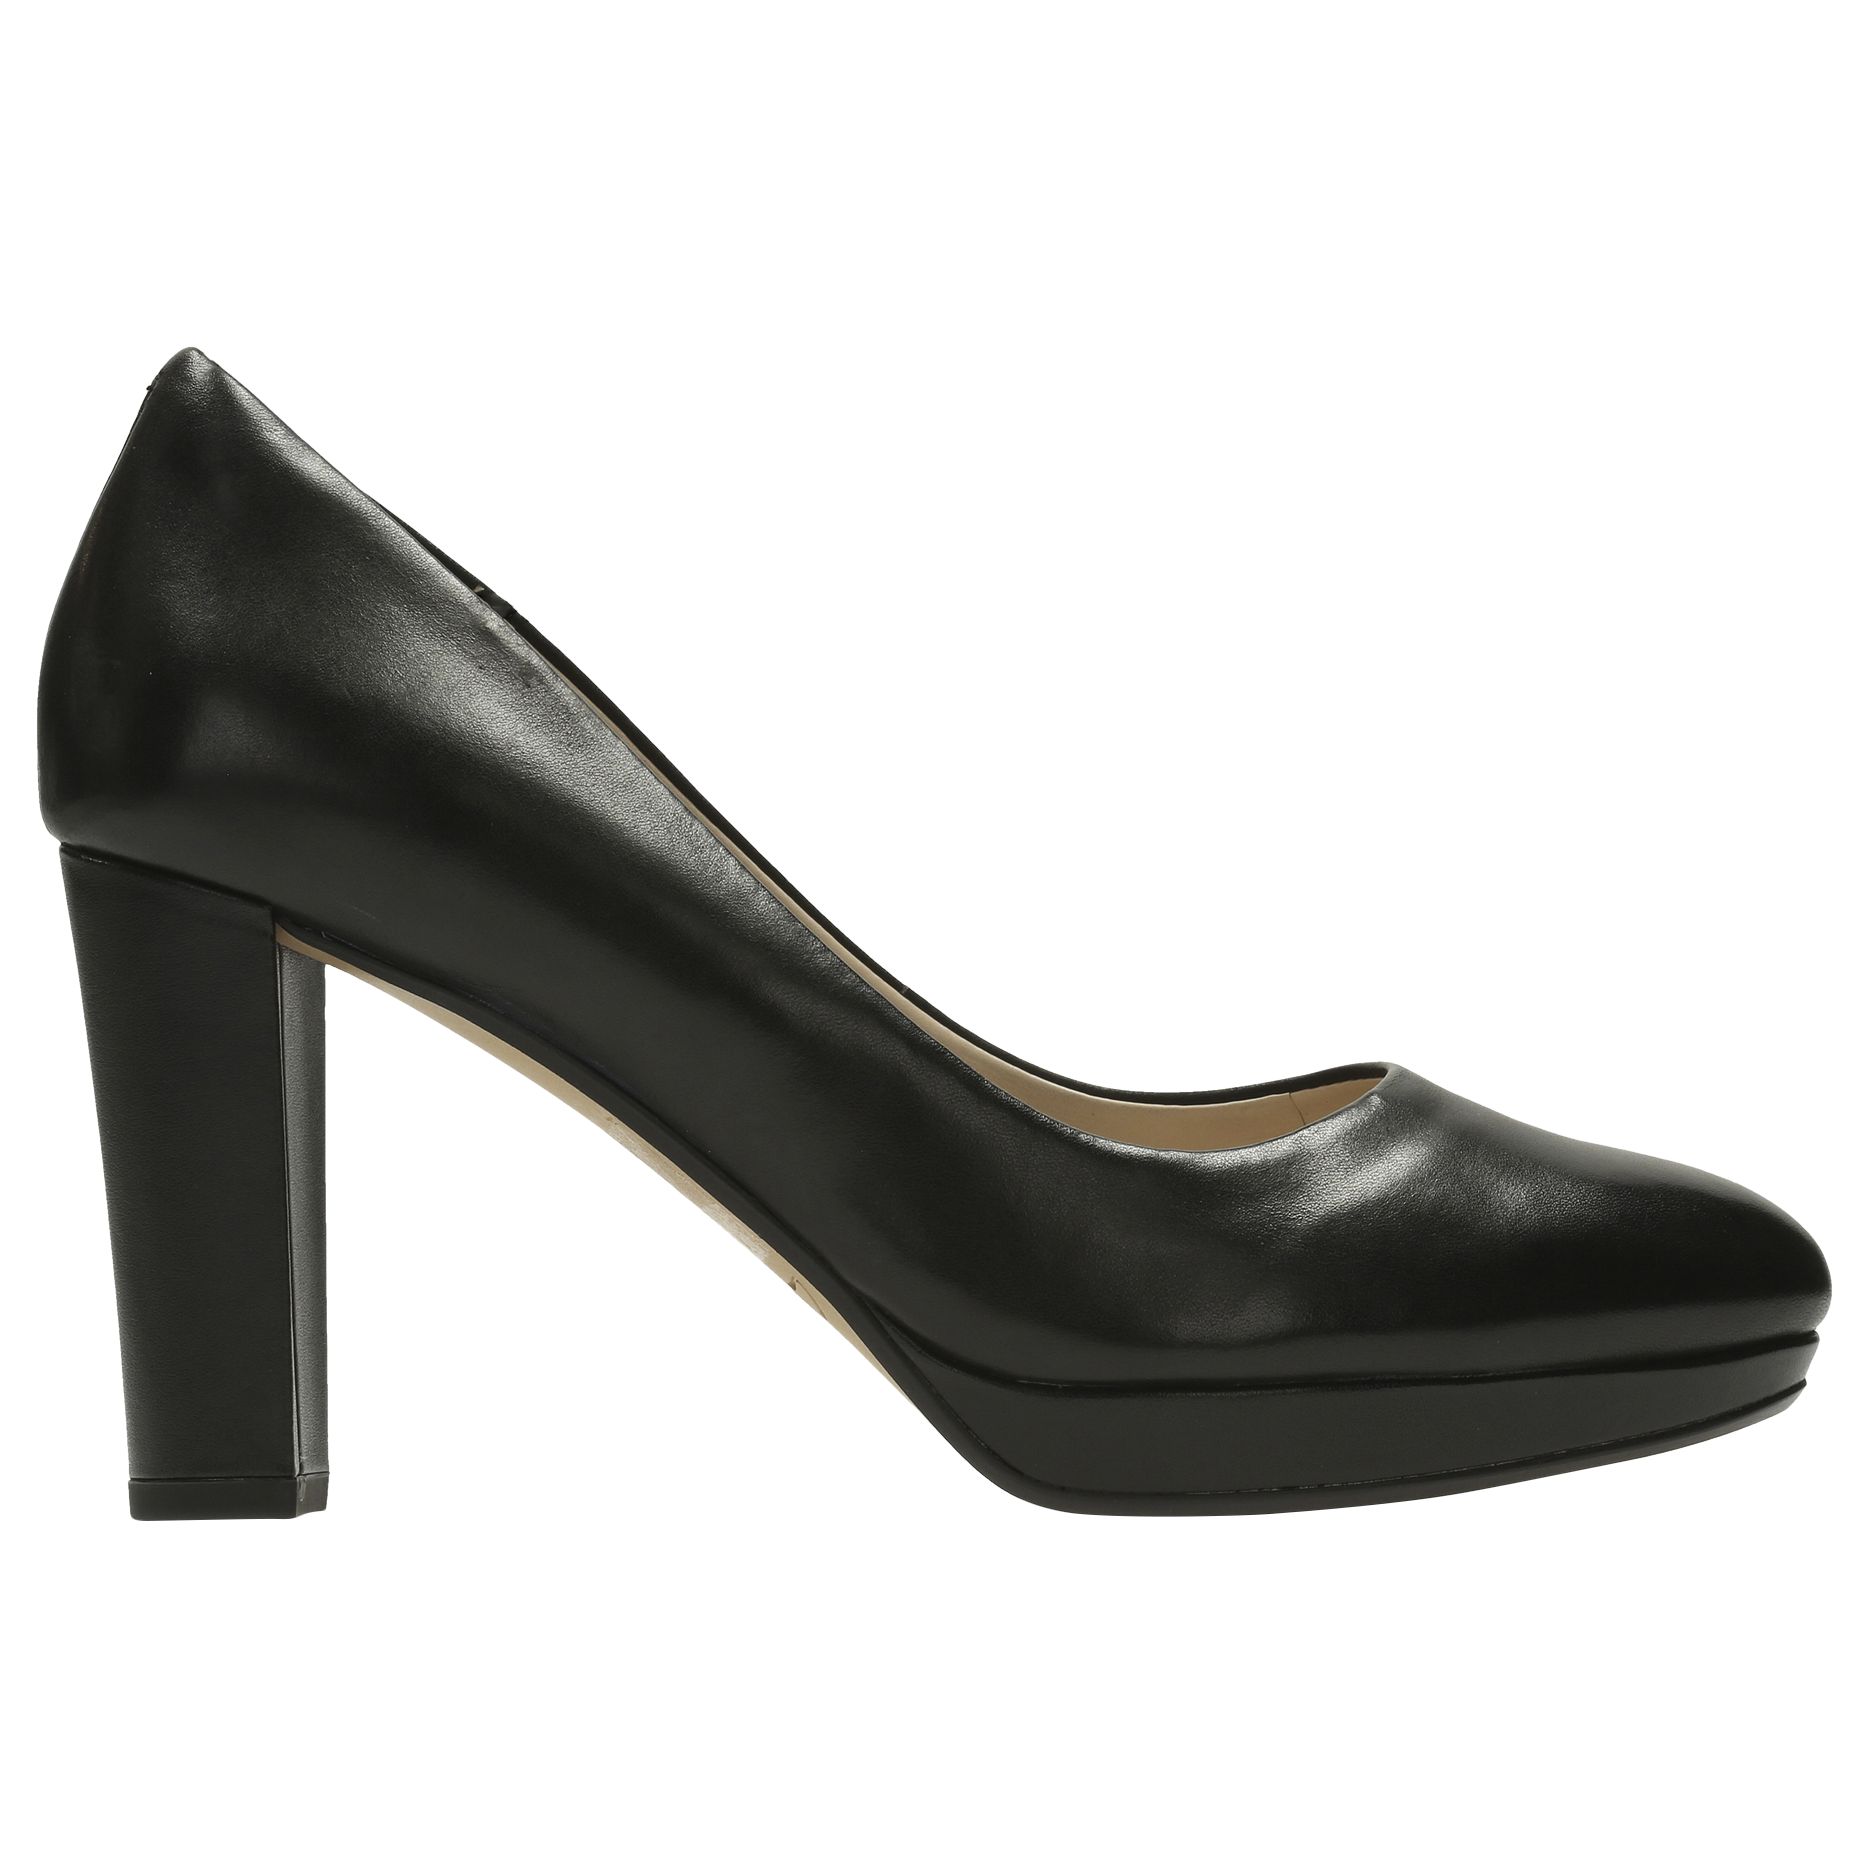 Clarks Kendra Sienna Court Shoes